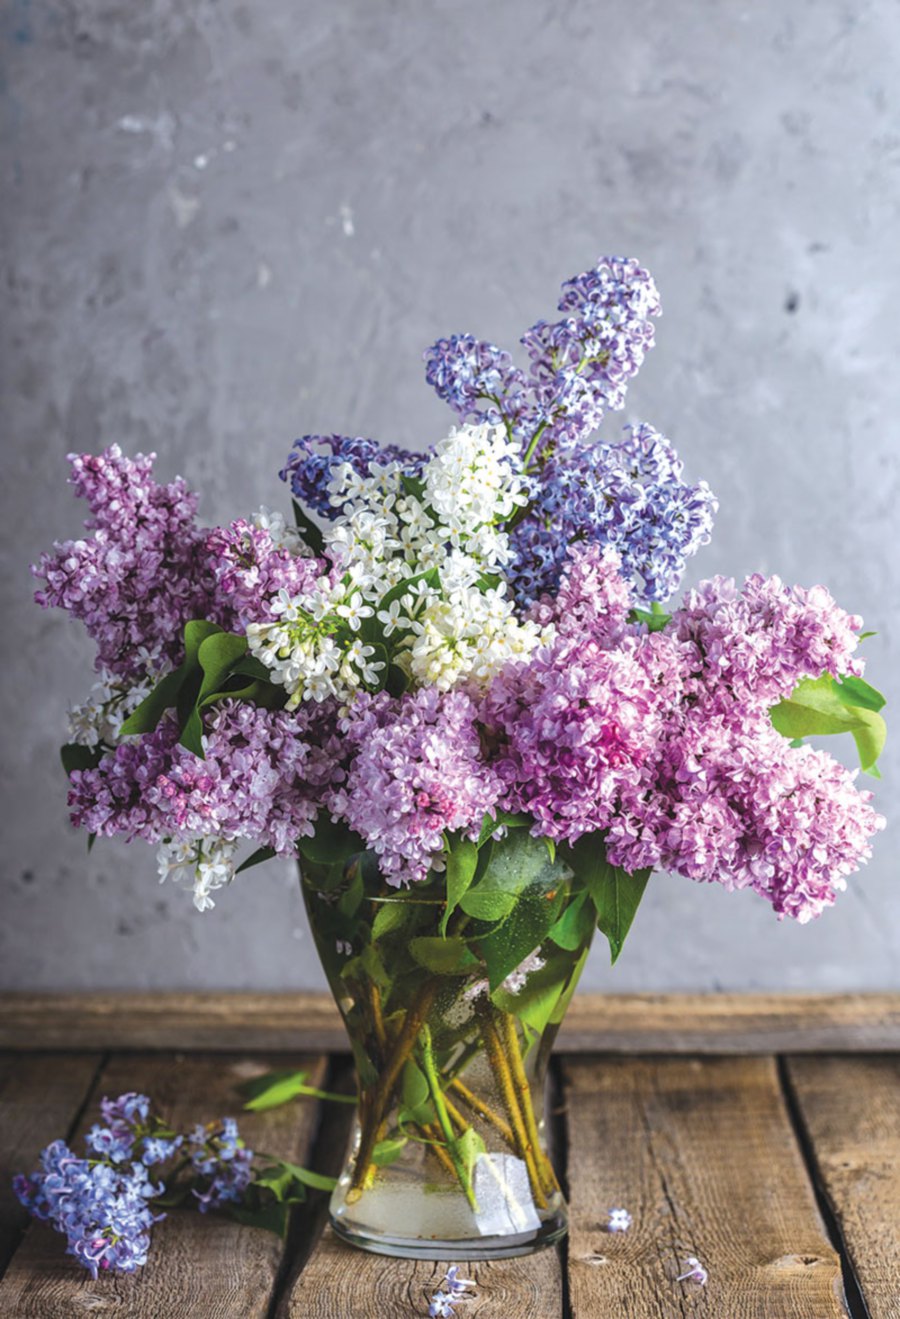 You can mix almost any lilacs together for a harmonious show.